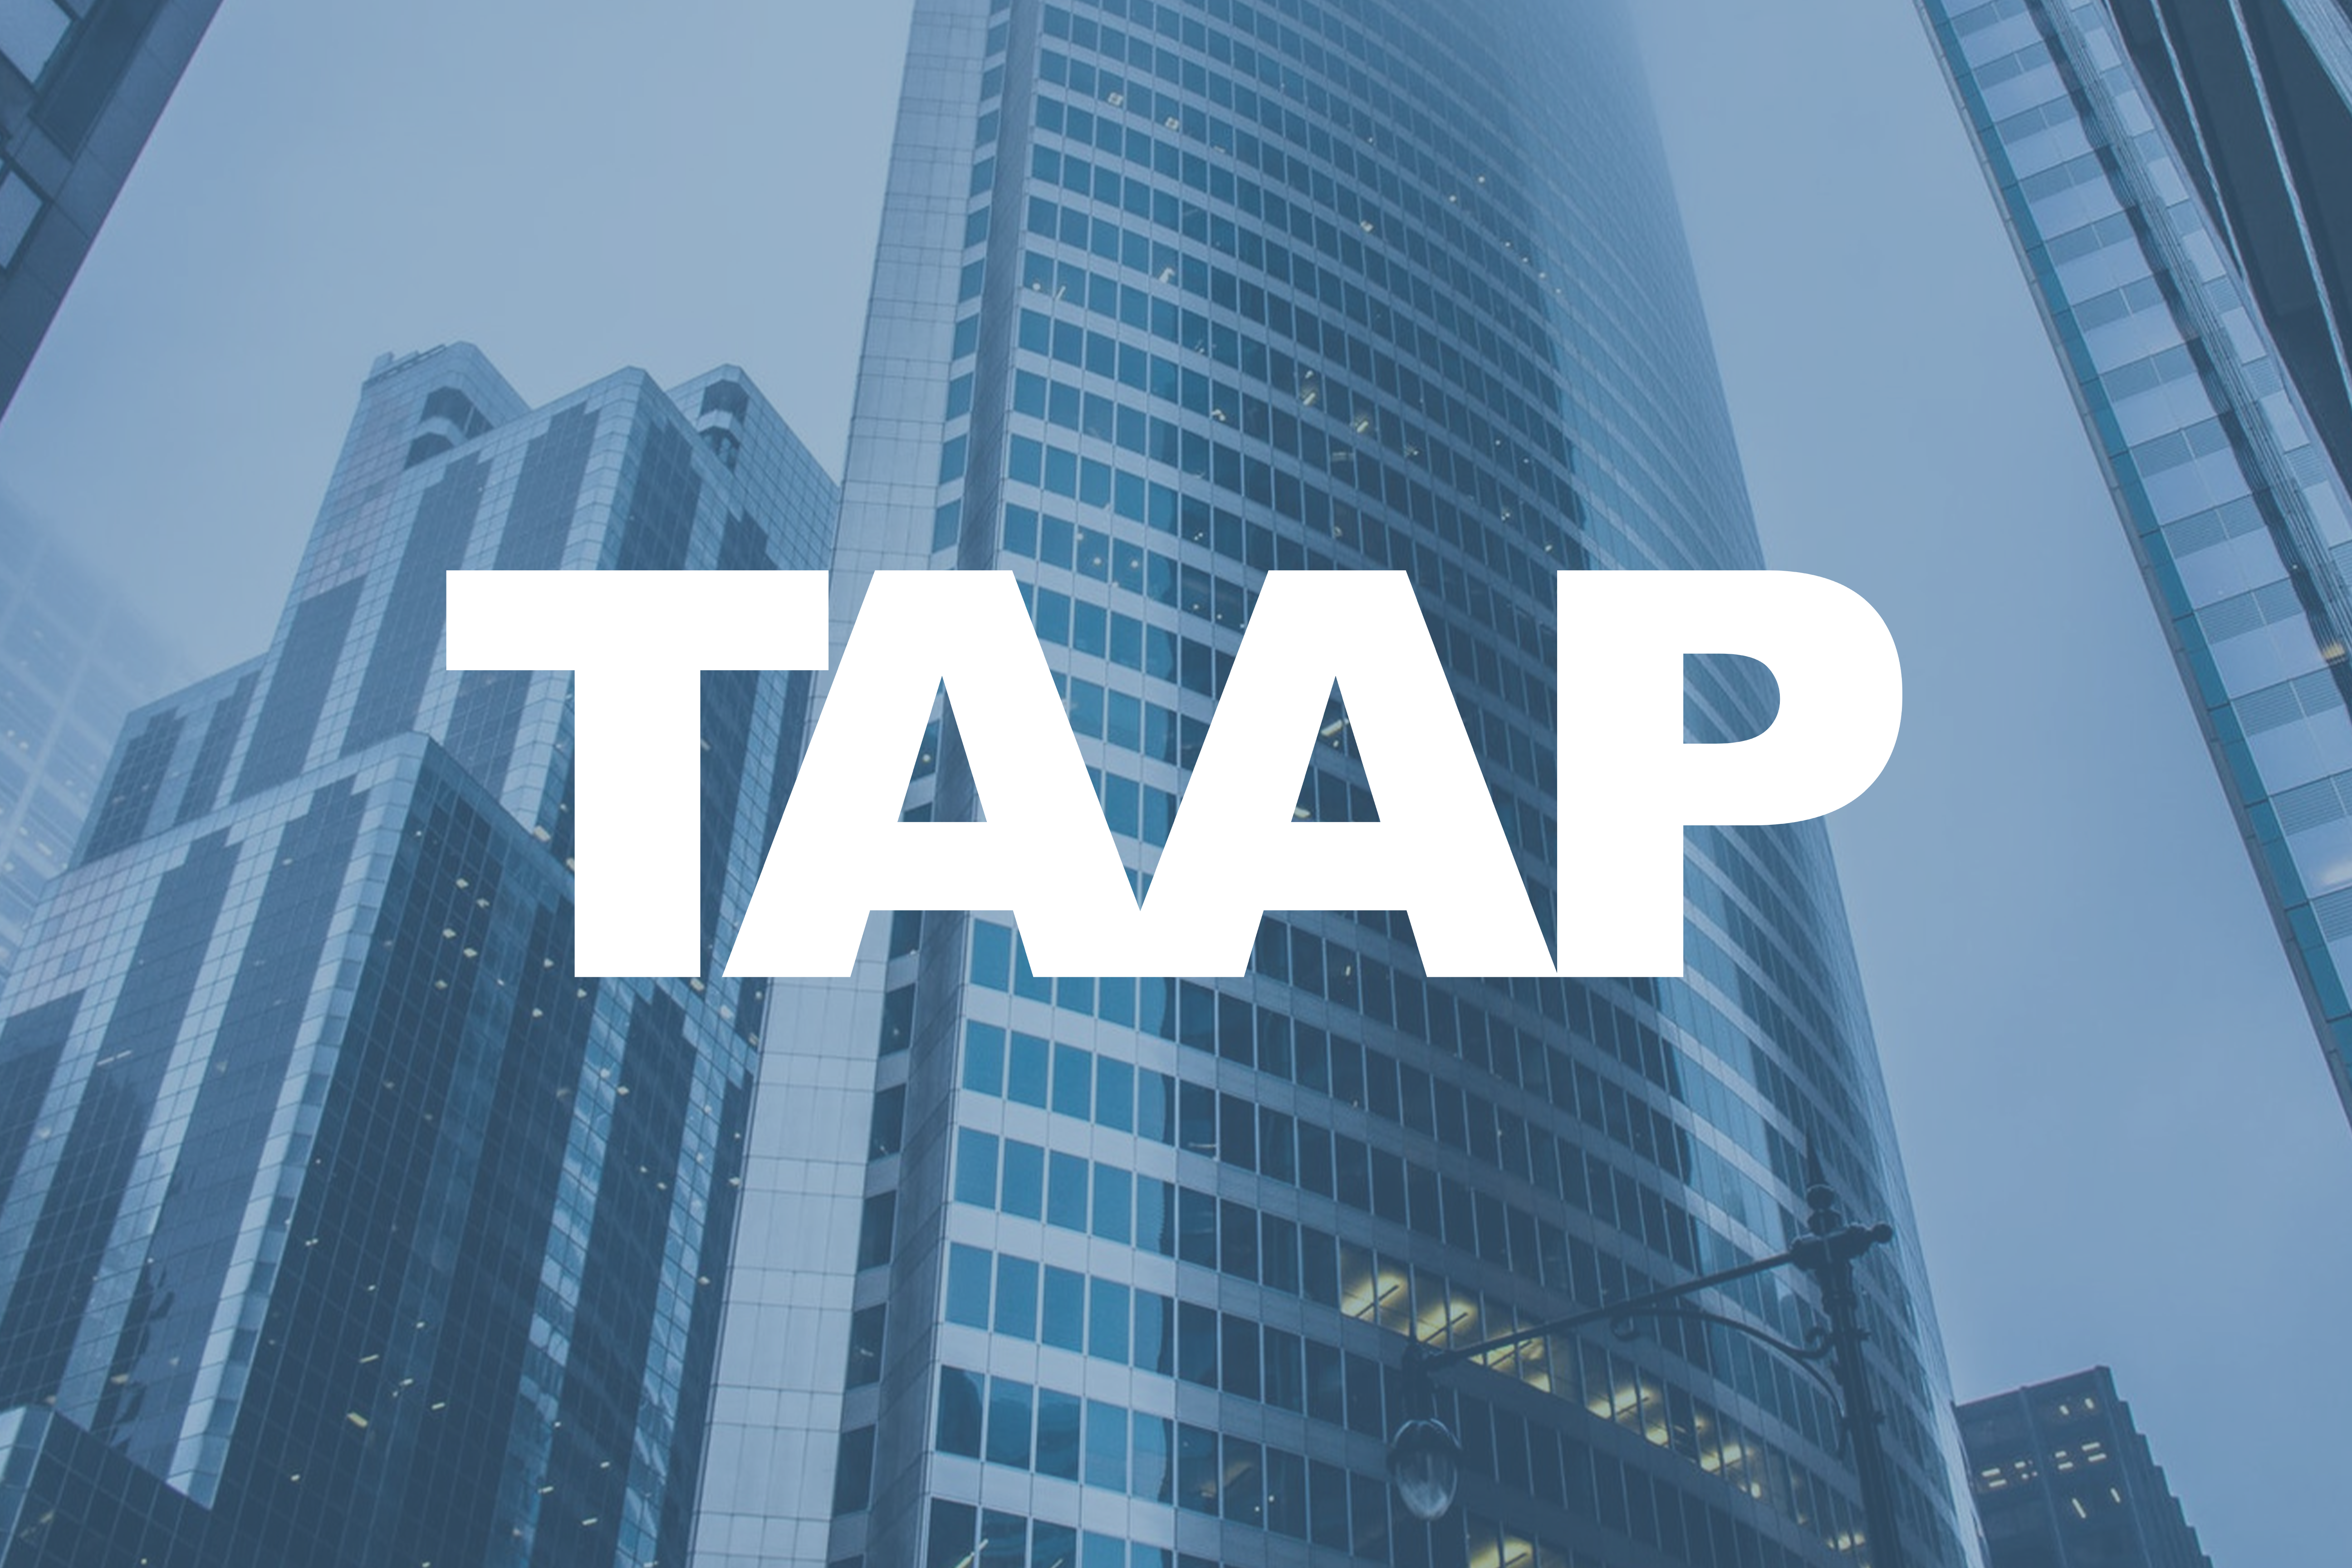 'TAAP' written over a background image of skyscrapers